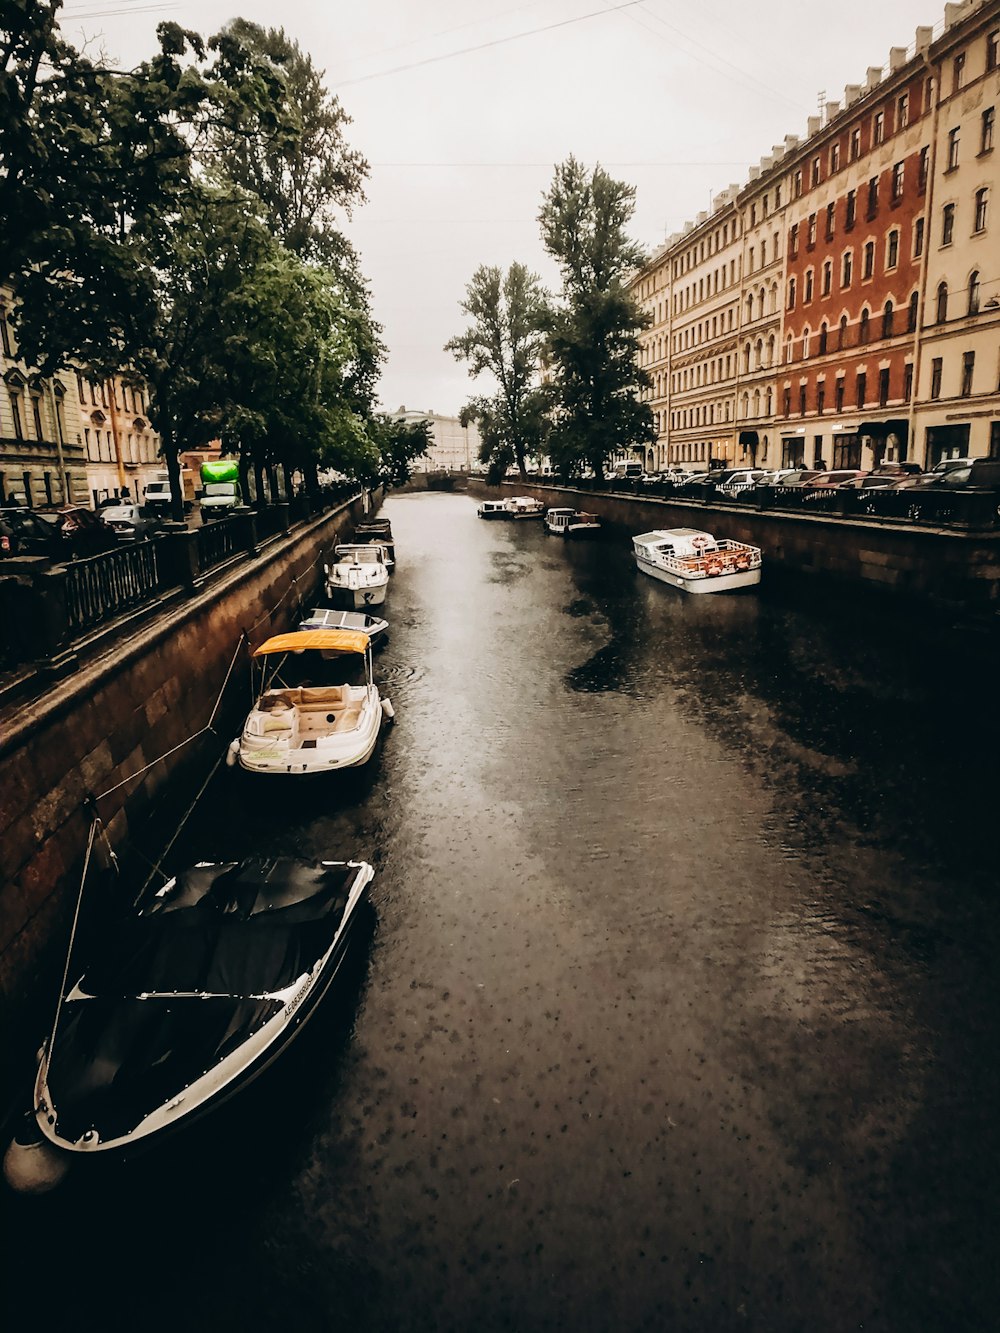 boats are parked along a canal in a city